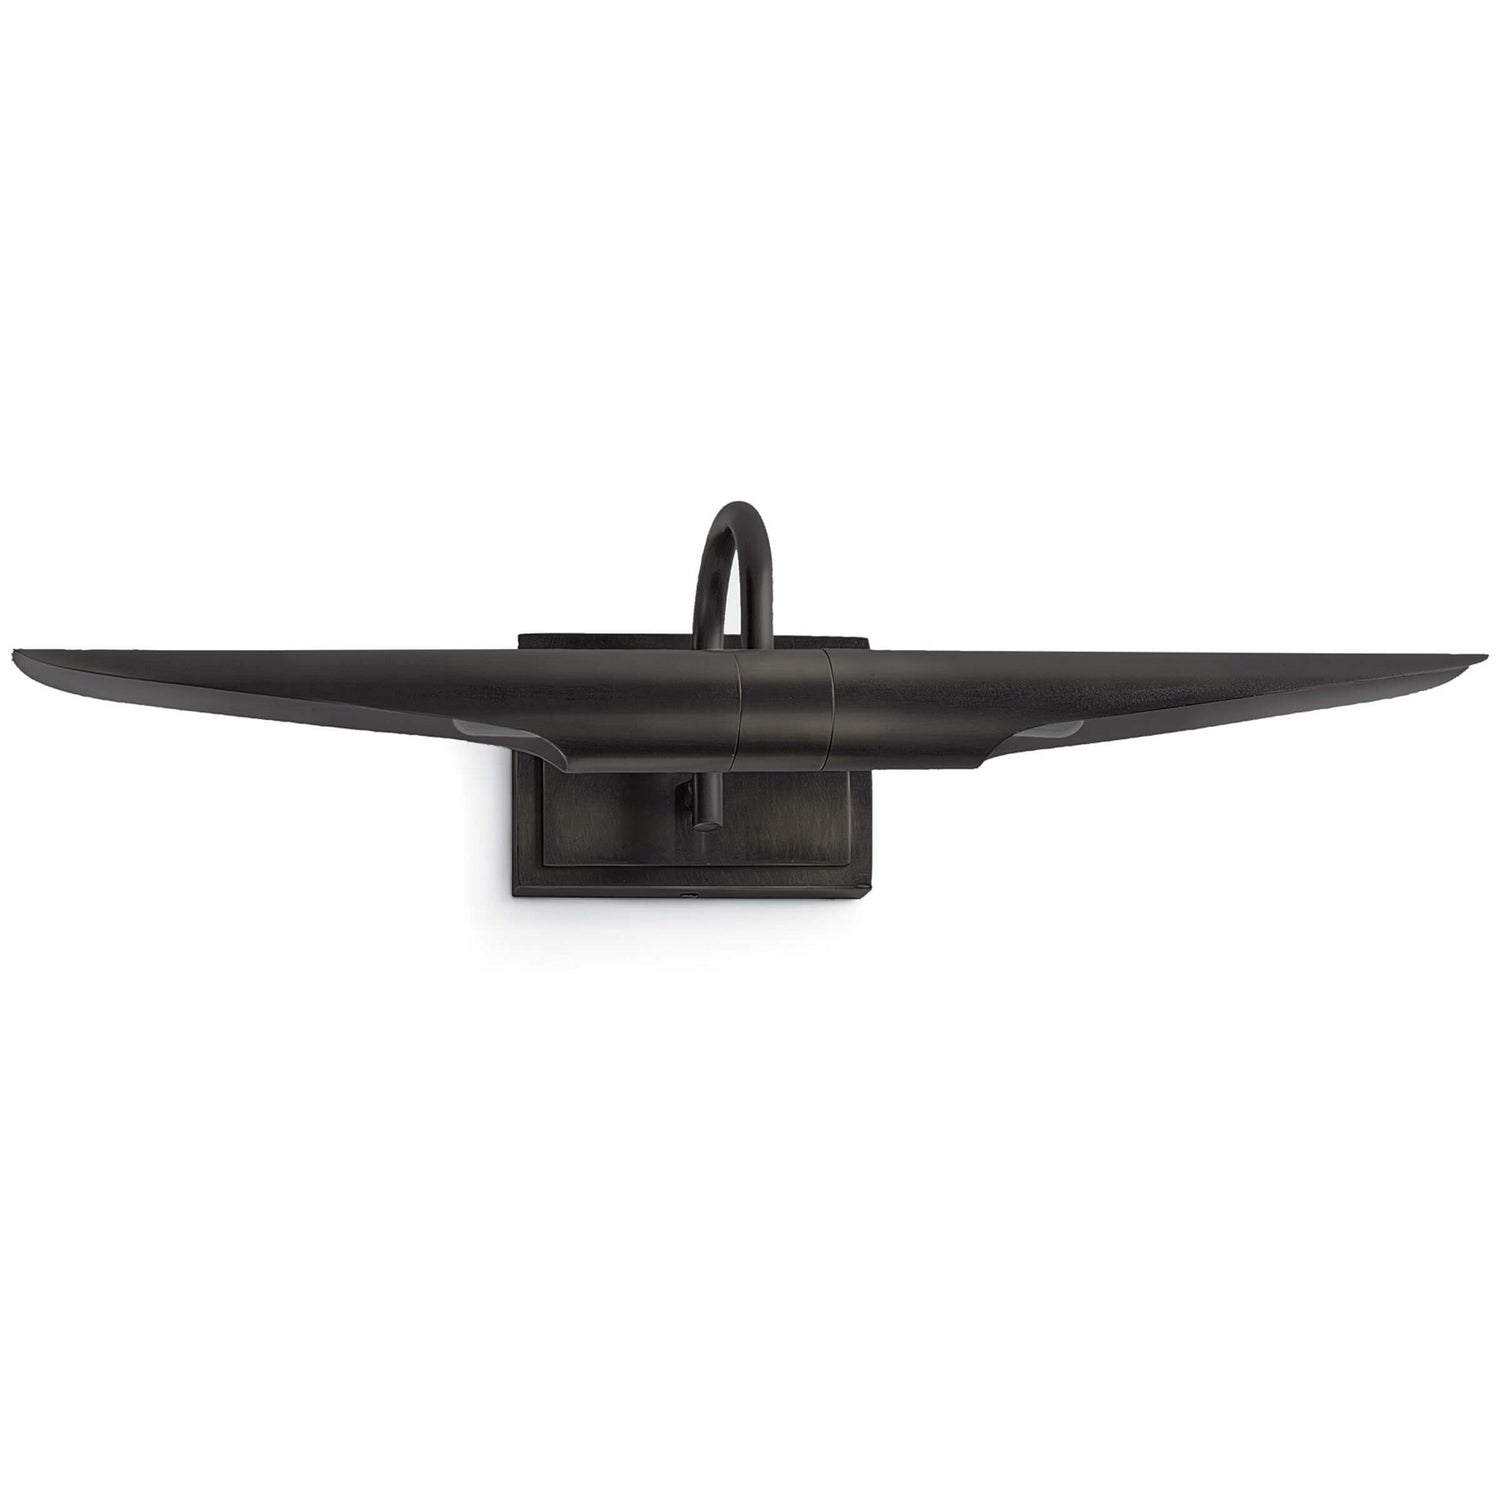 Regina Andrew - 15-1047ORB - Two Light Wall Sconce - Redford - Oil Rubbed Bronze